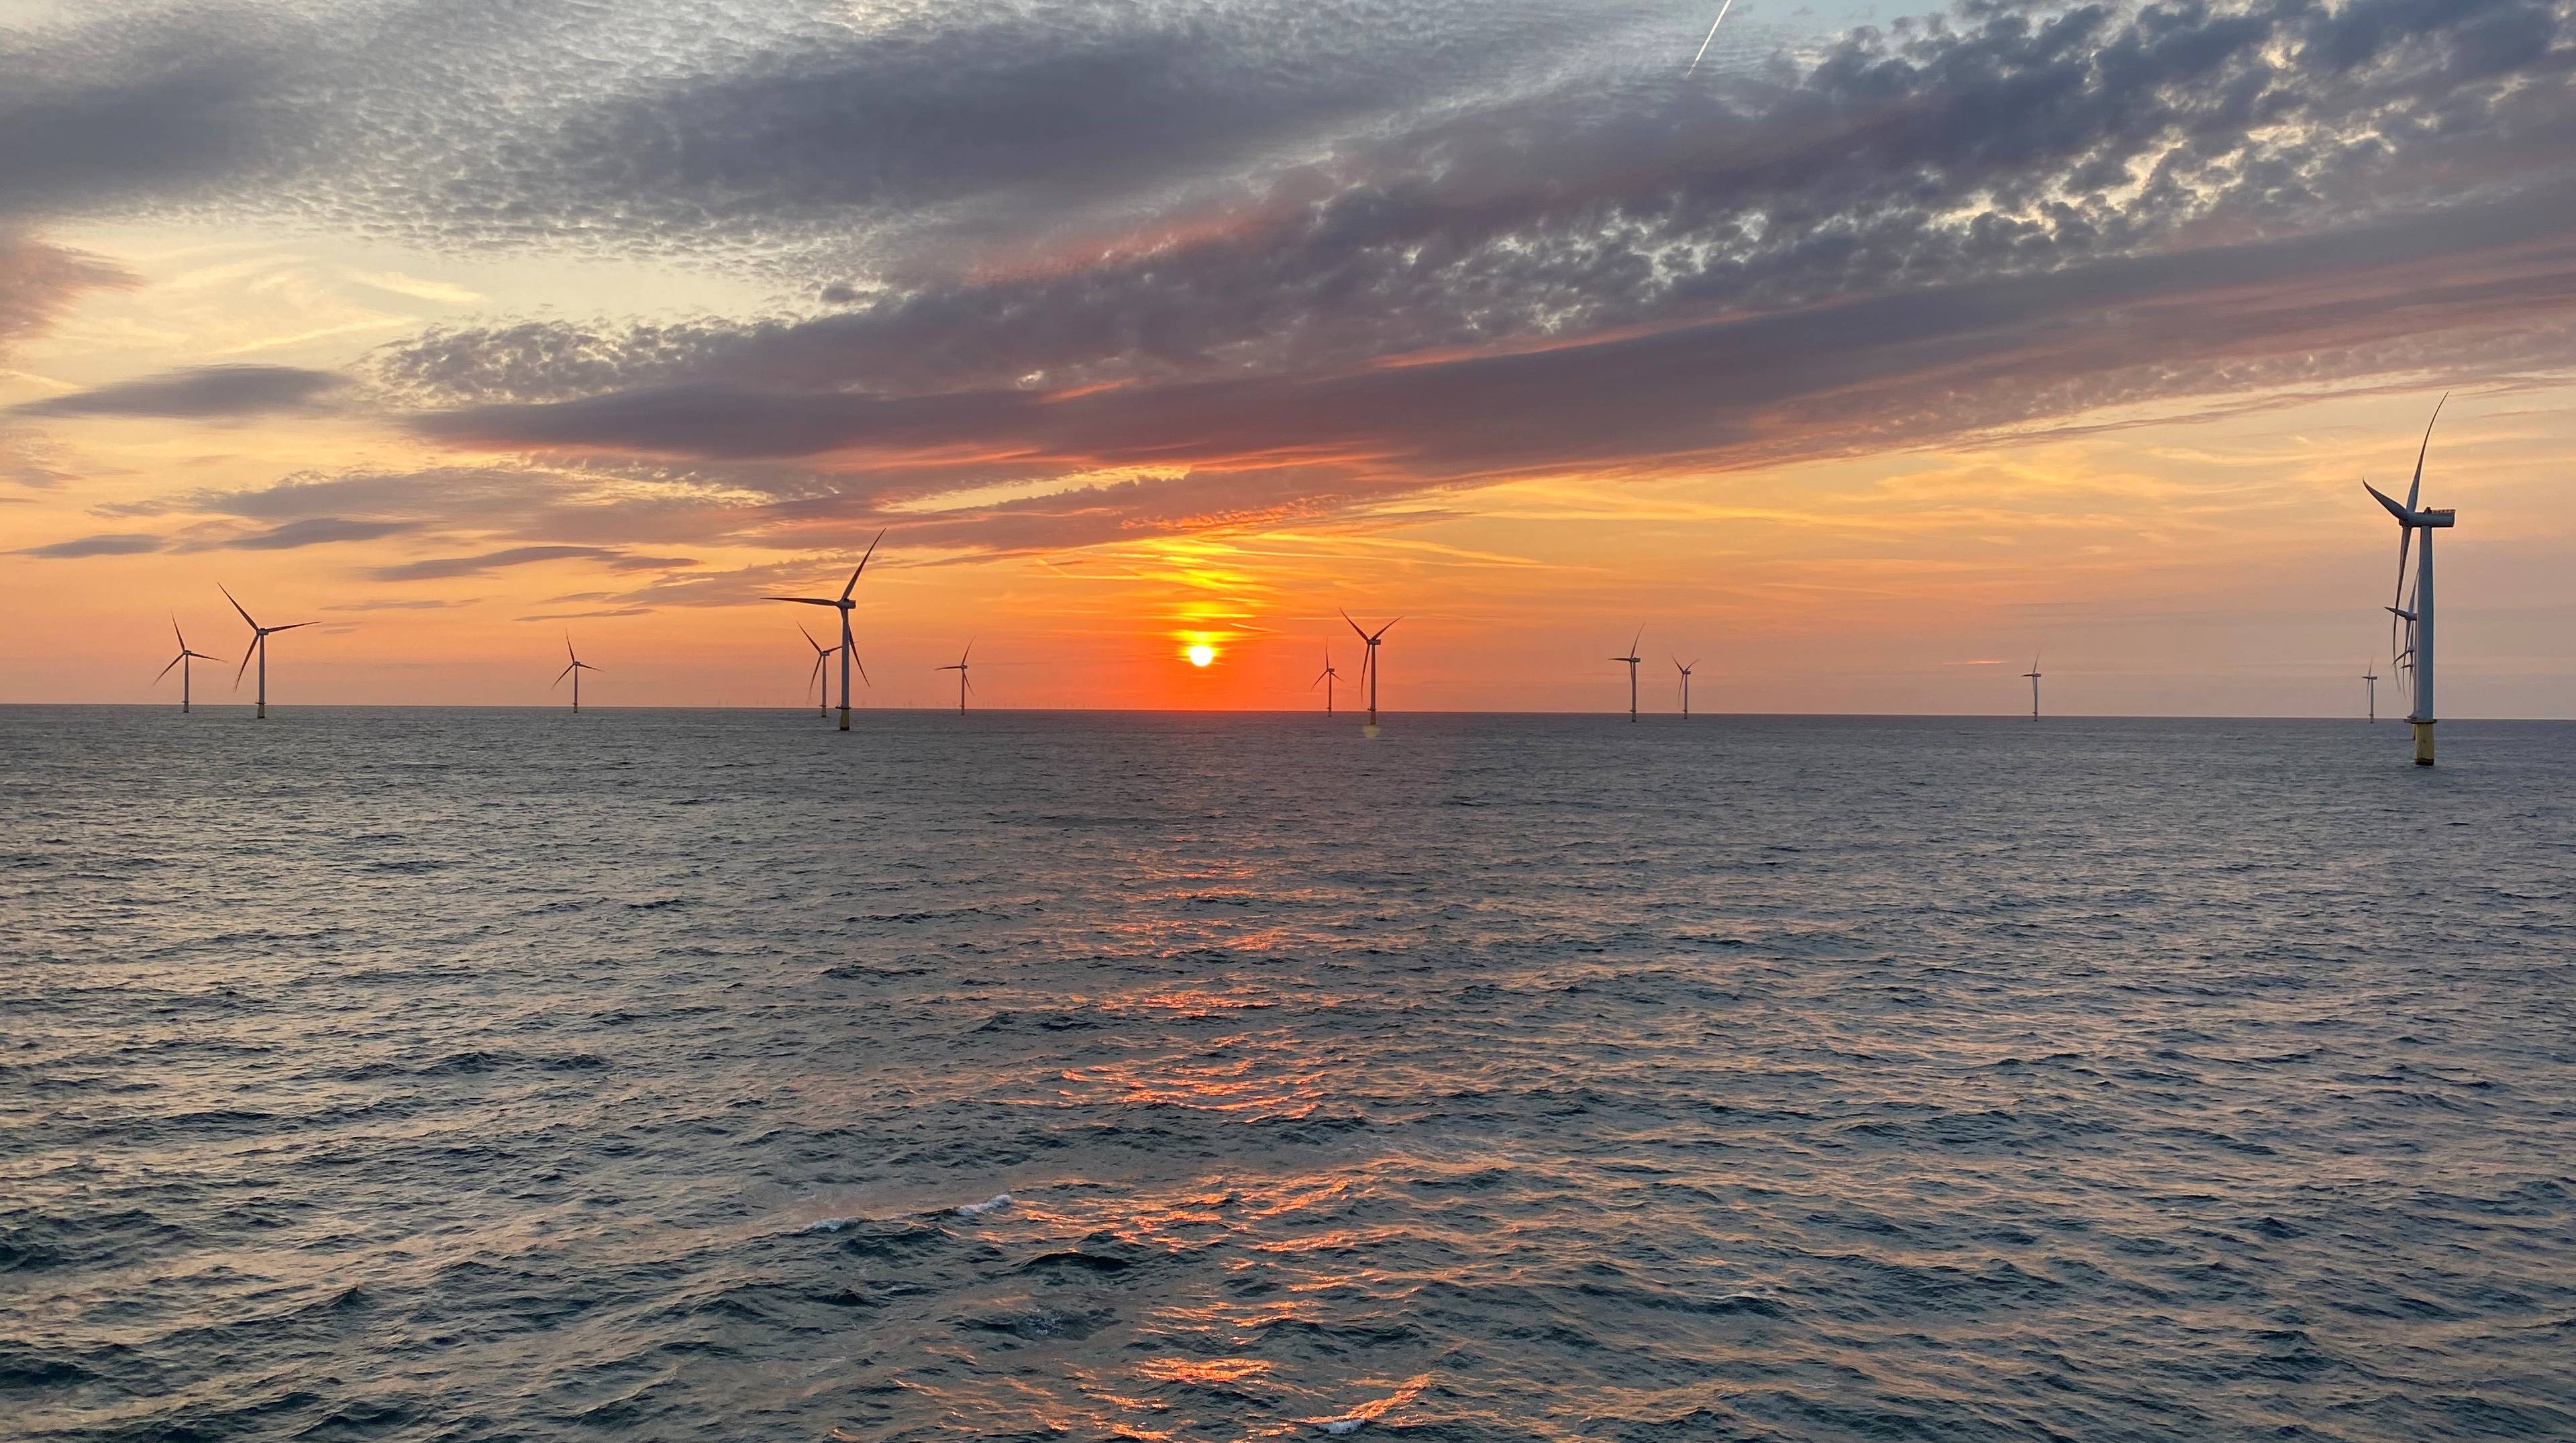 Sunset at the Dudgeon wind farm